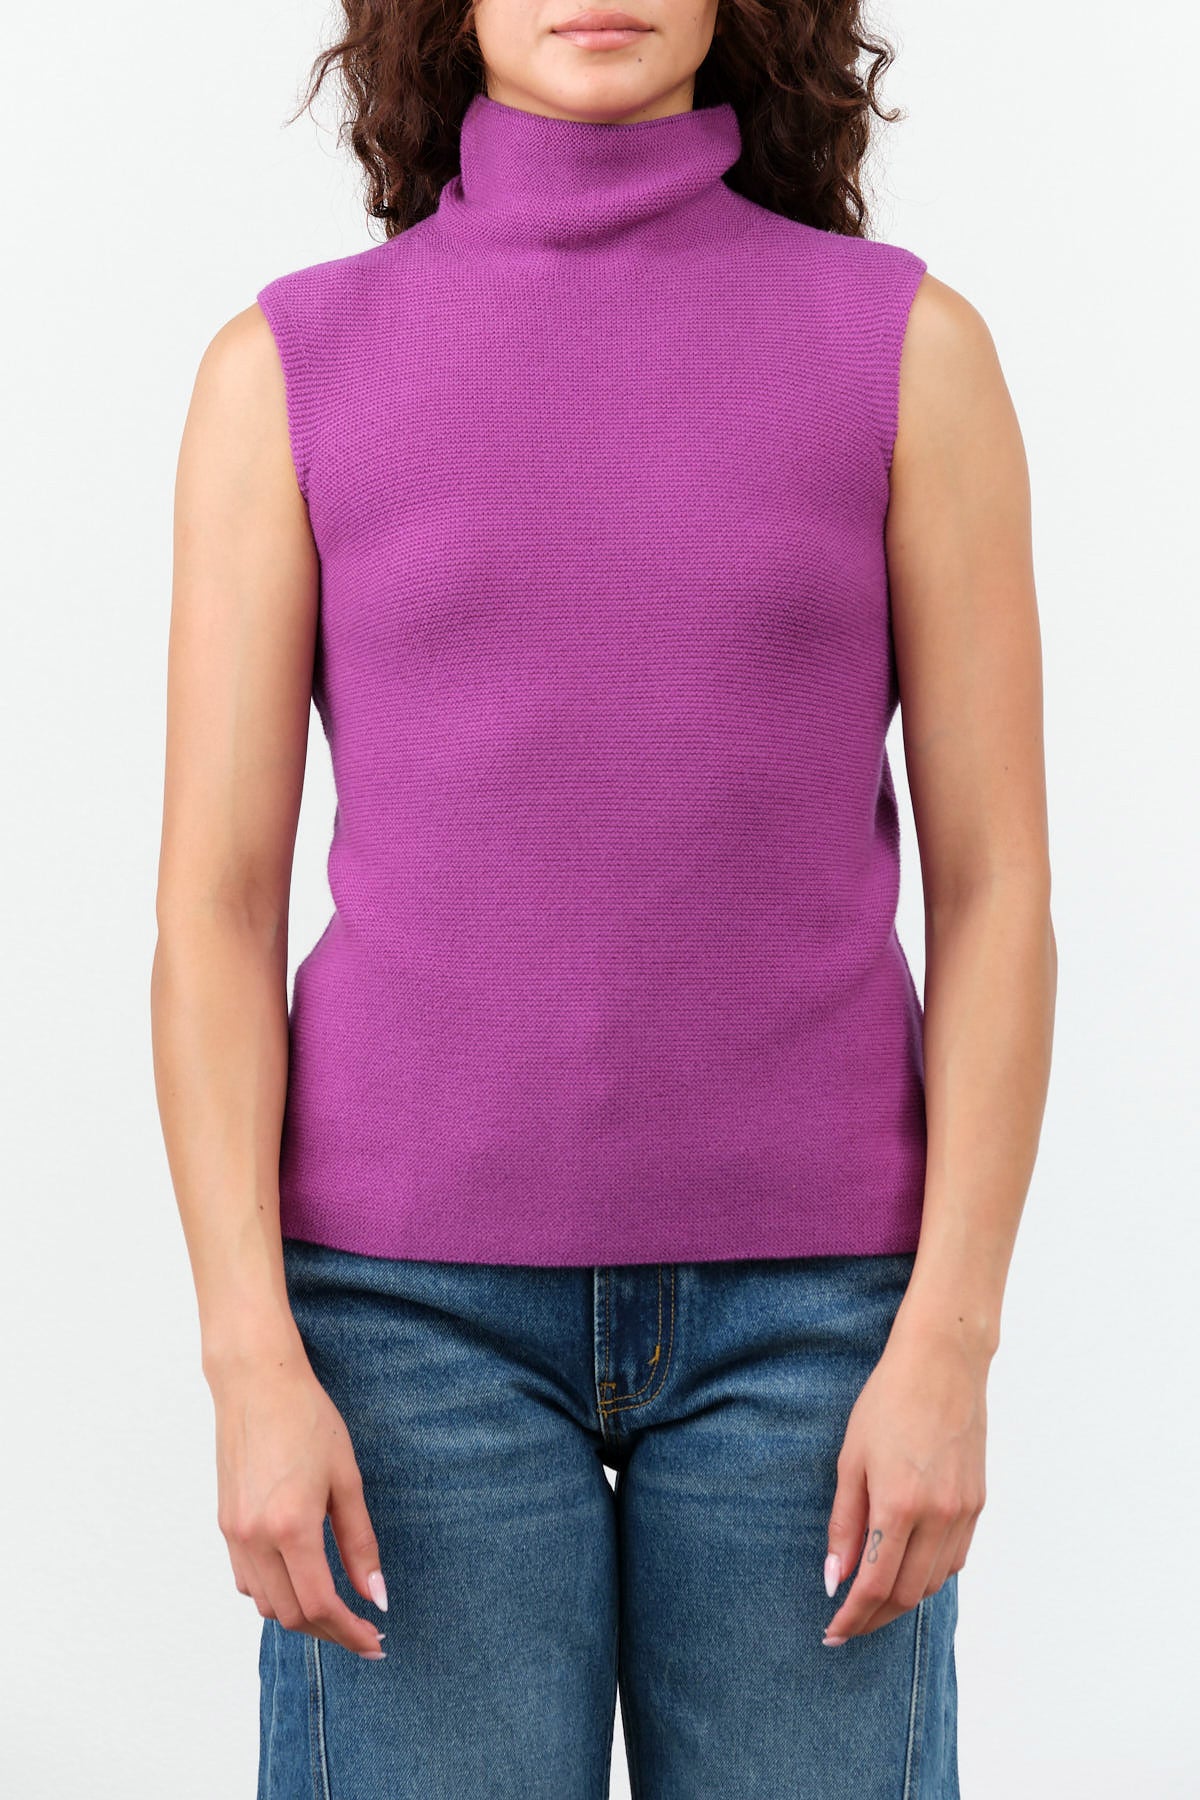 Kewili Top by Christian Wijnants in Dark Orchid